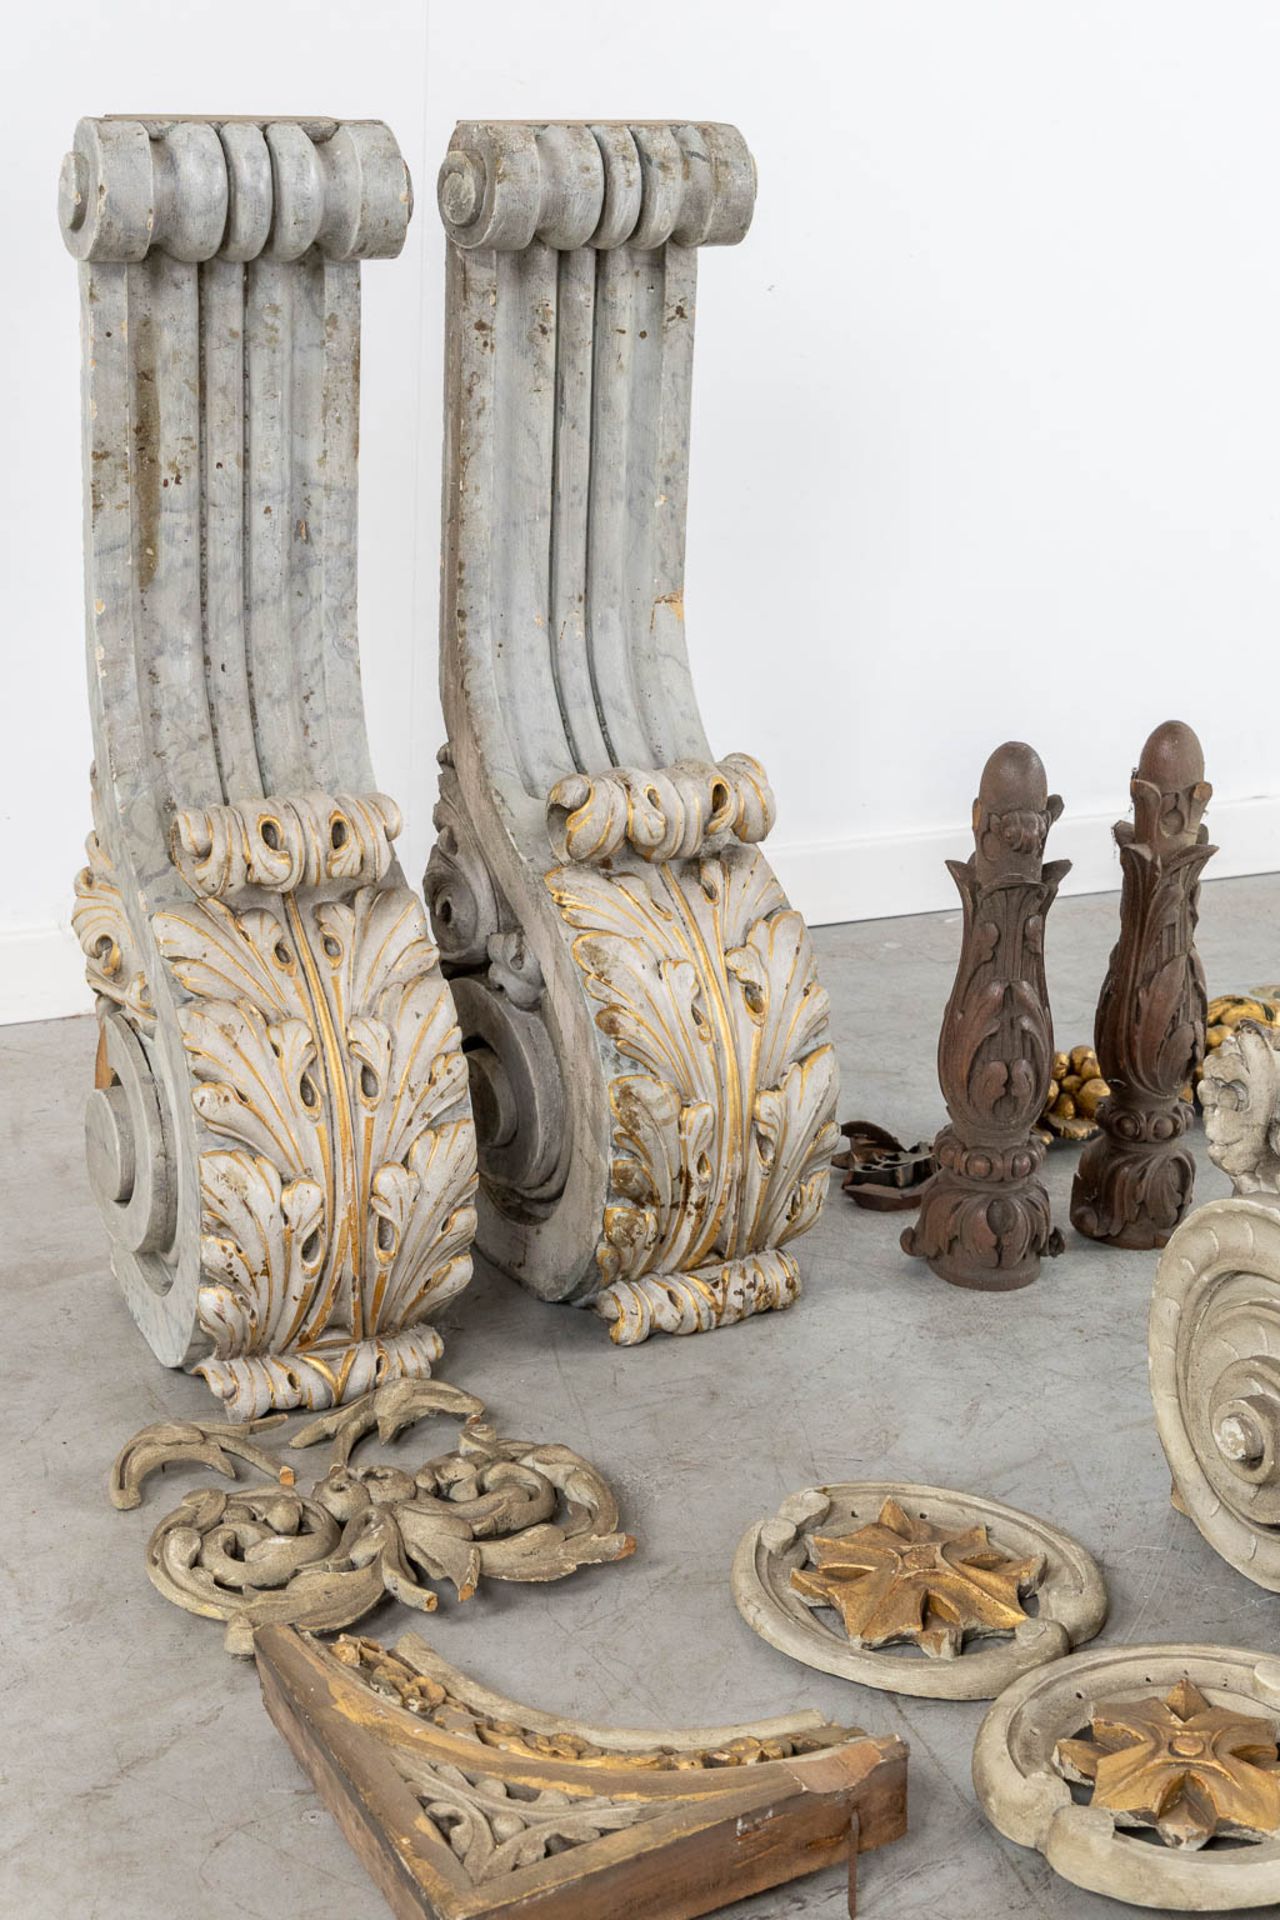 A large collection of sculptured wood parts and Architectural elements, 19th and 20th C. (L:116 cm) - Image 10 of 19